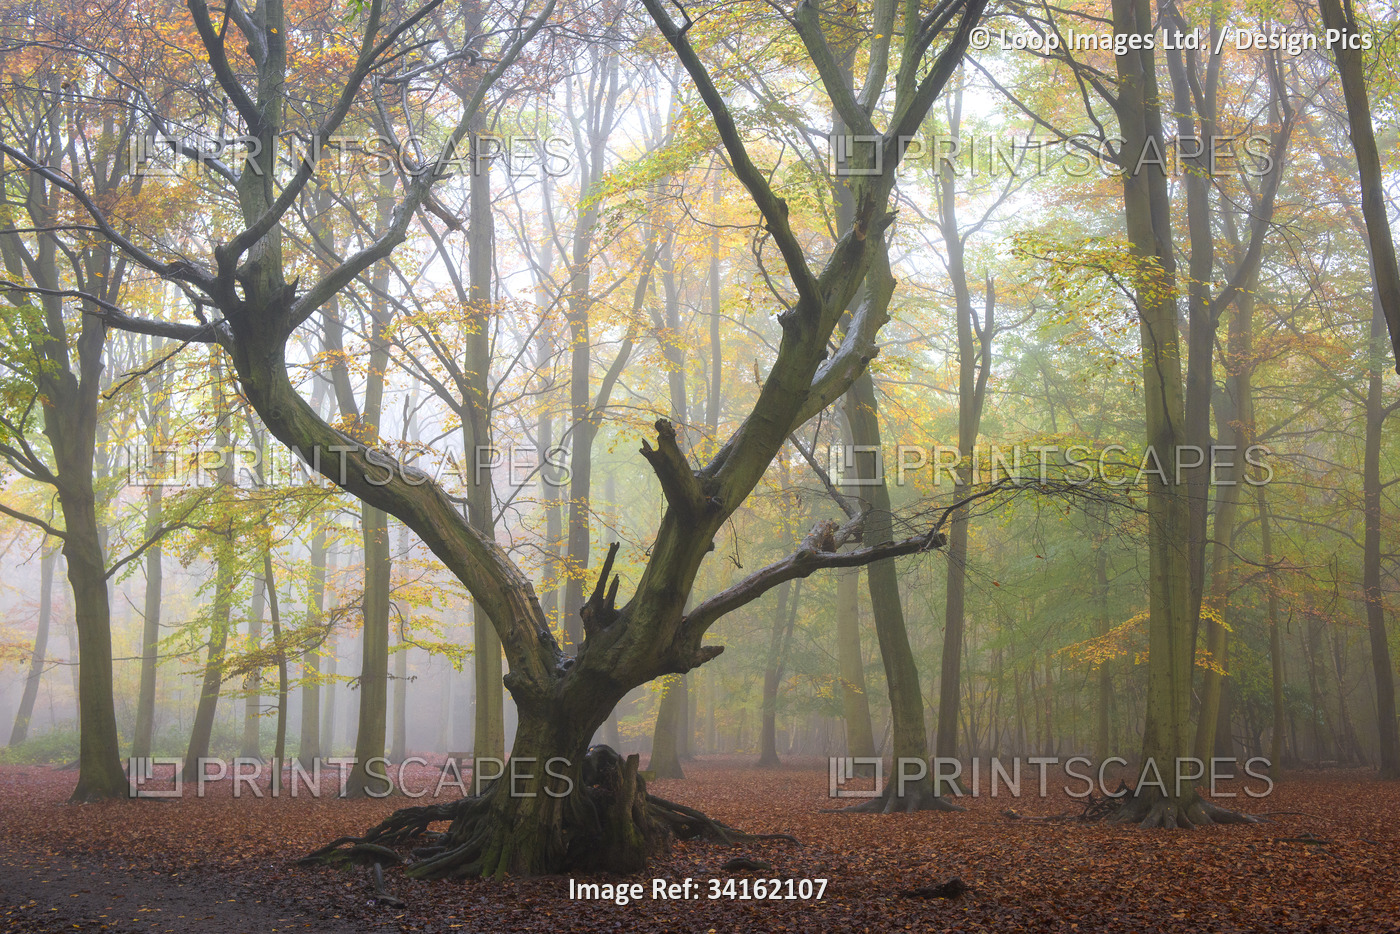 Foggy conditions in an autumnal woodland in Essex.